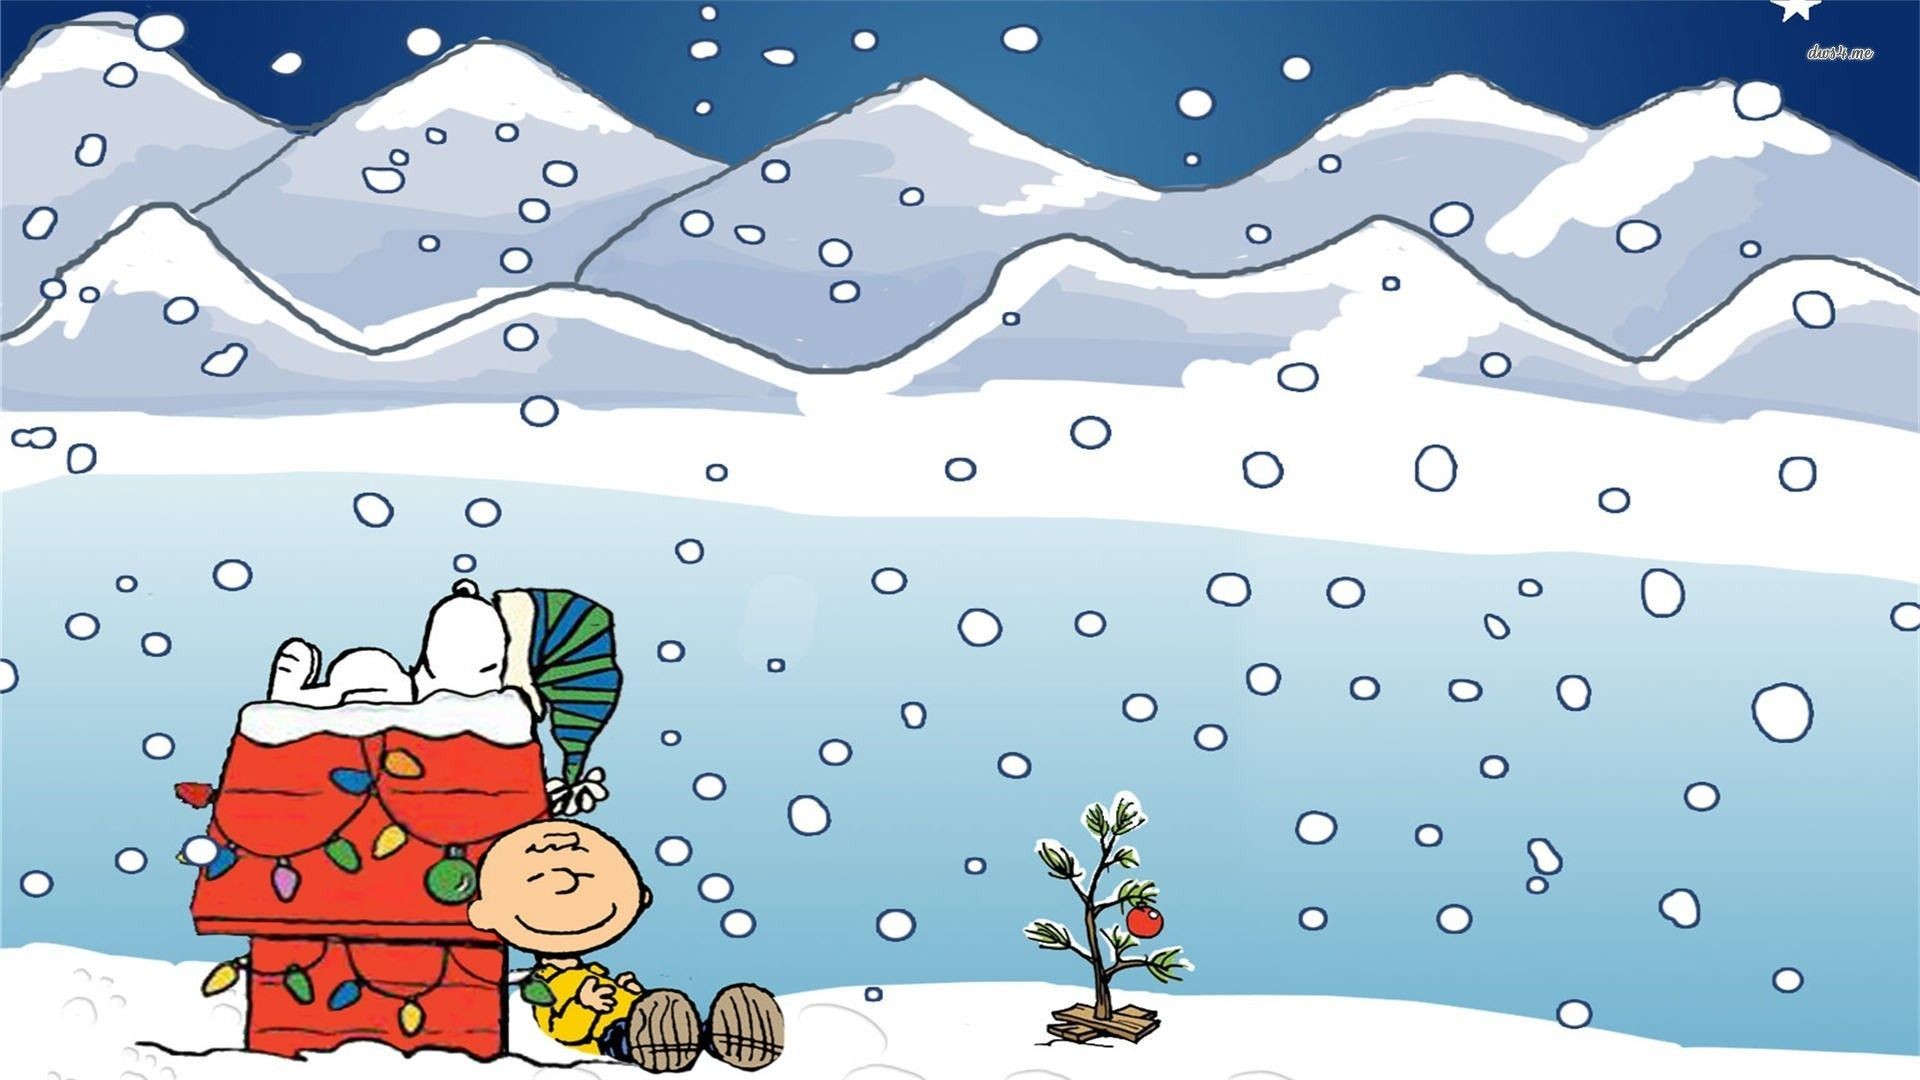 1920x1080 Charlie Brown and Snoopy wallpaper - Cartoon wallpapers - #12189